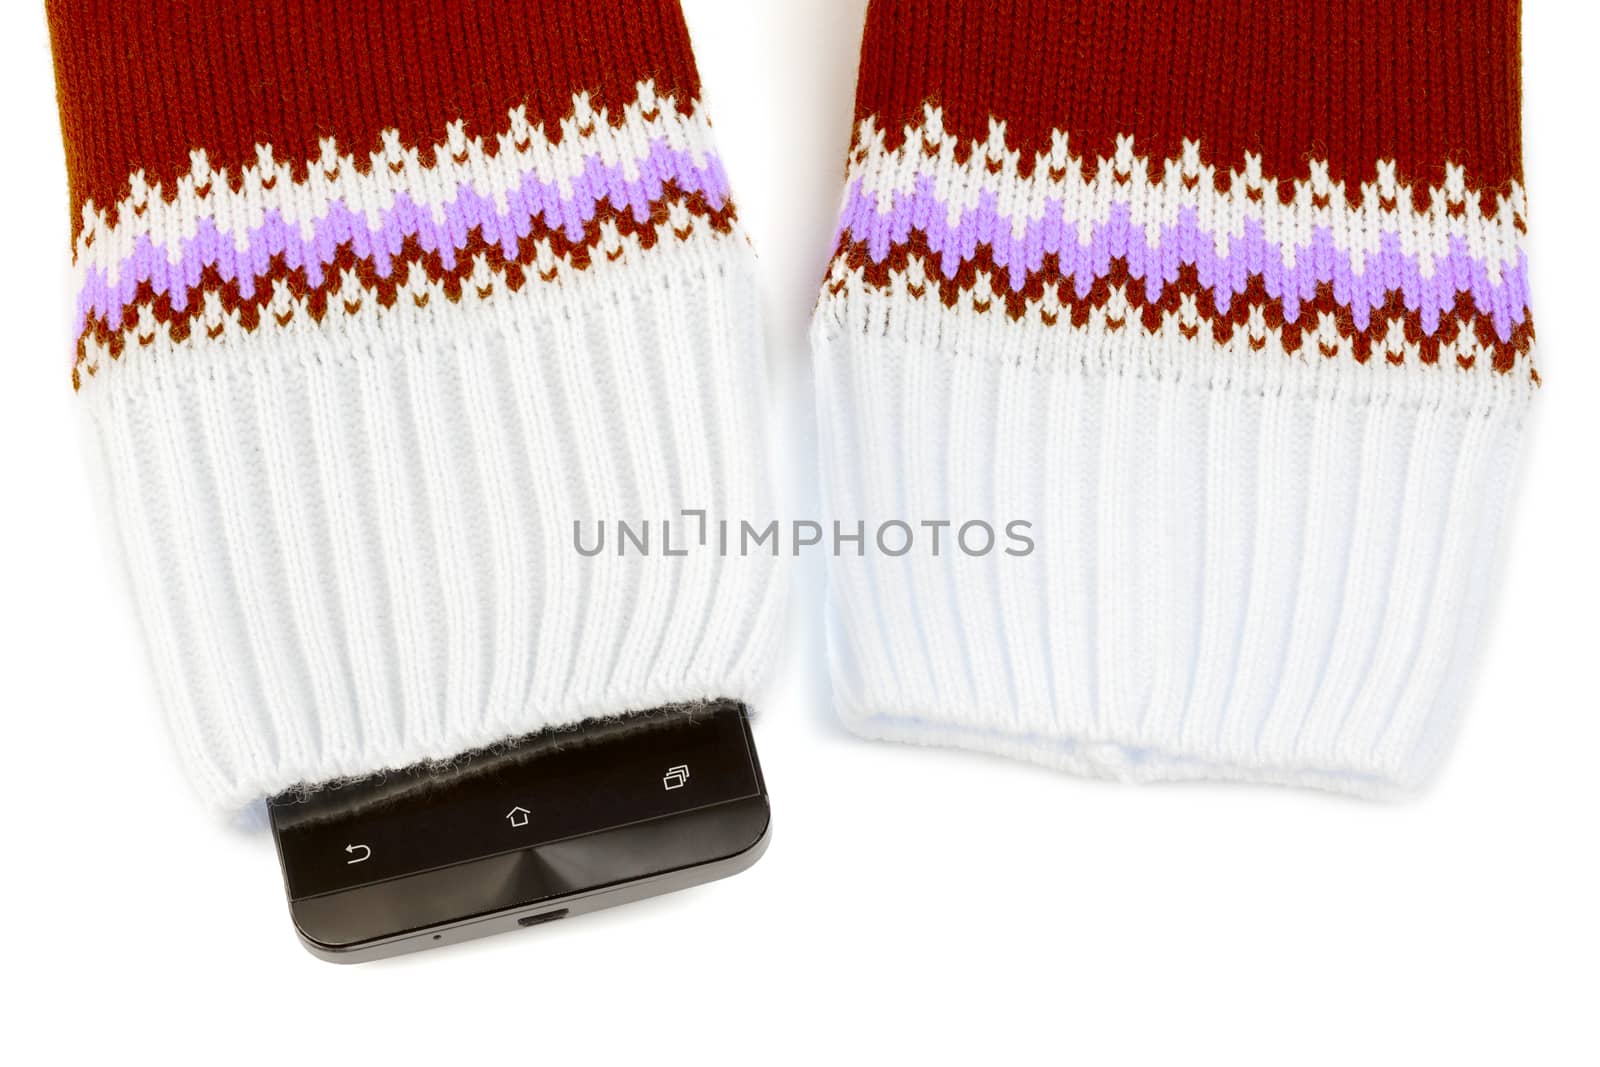 cellphone sticking out from knitted fabric like sweater or mittens by z1b